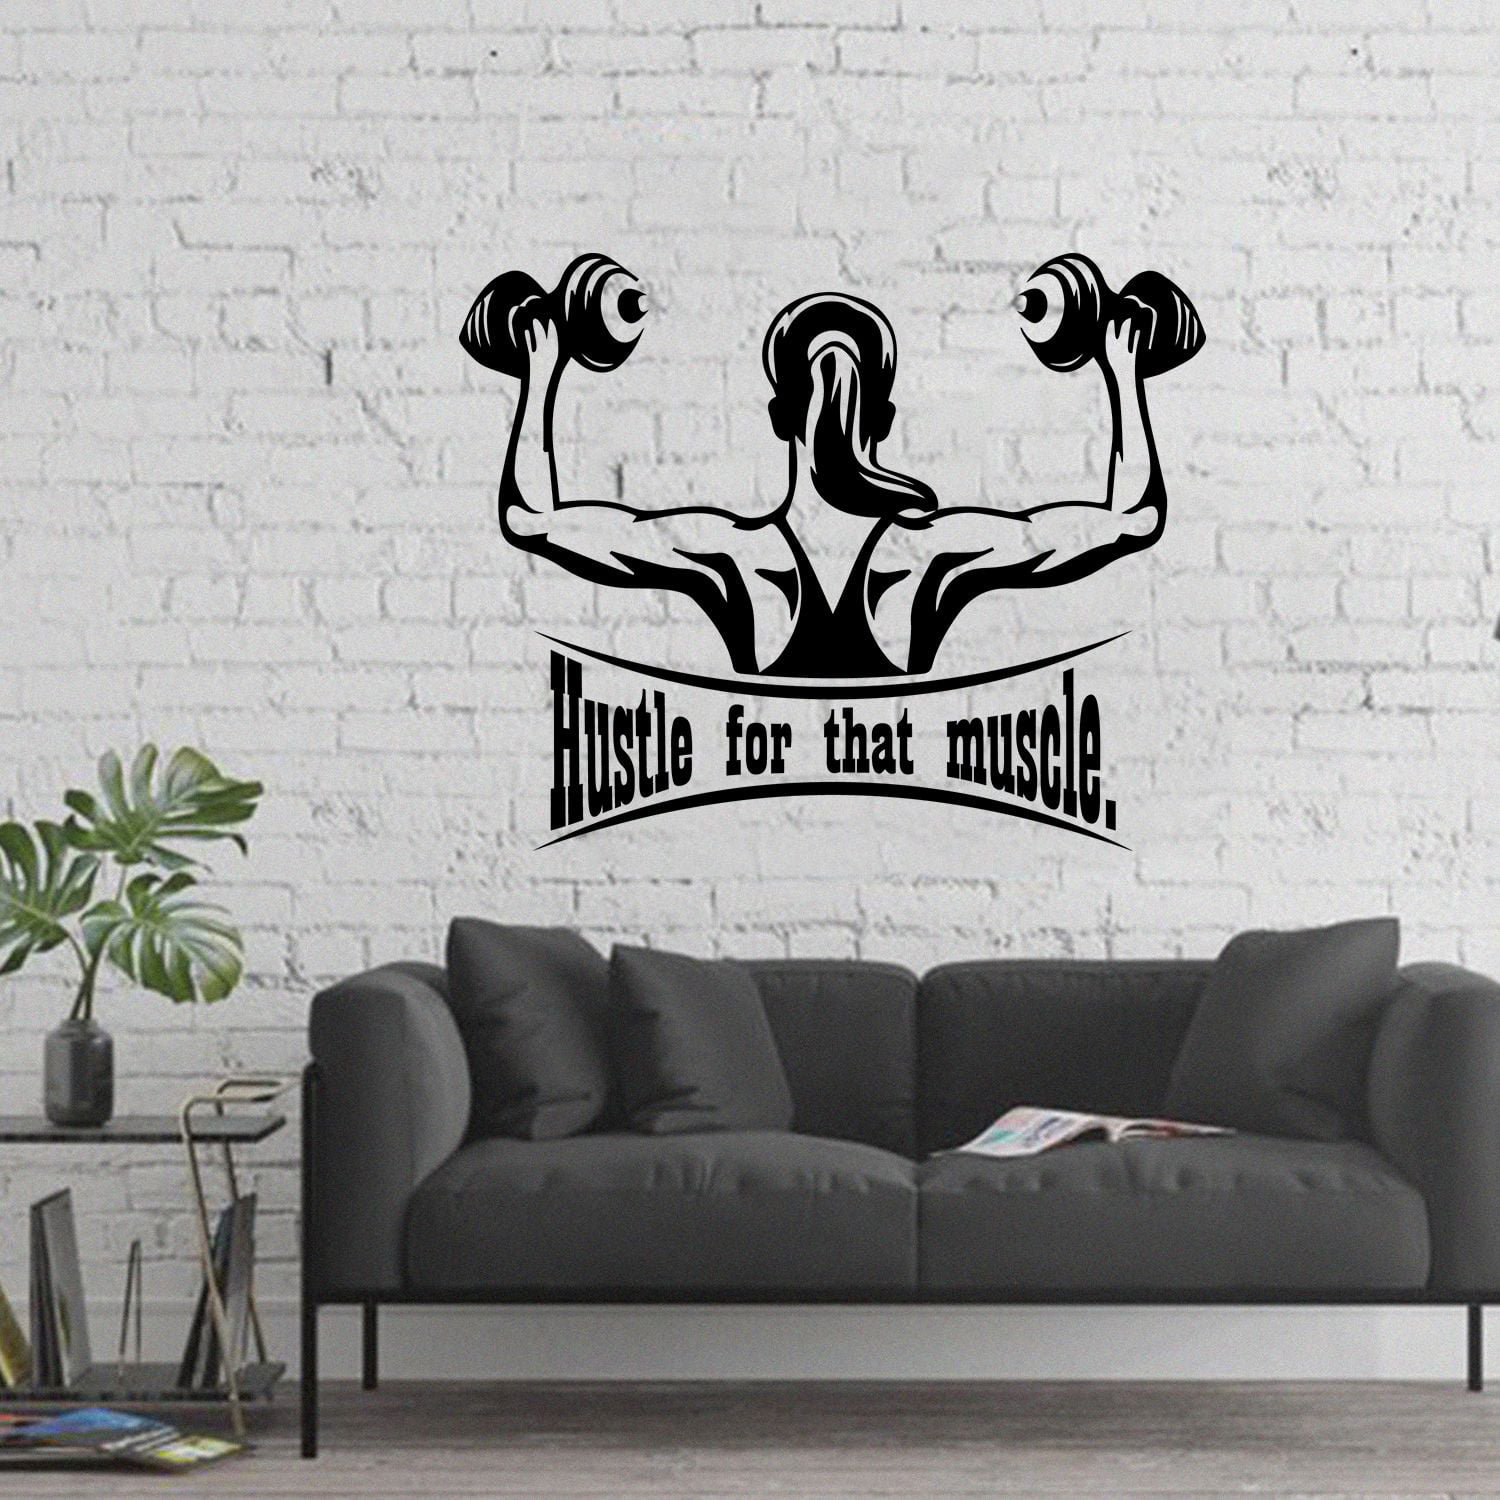 Sports Decor Sports Decals Exercise Stickers Fitness Stickers Sports Wall Decal Workout Stickers Gym Wall Stickers Gym Wall Decals